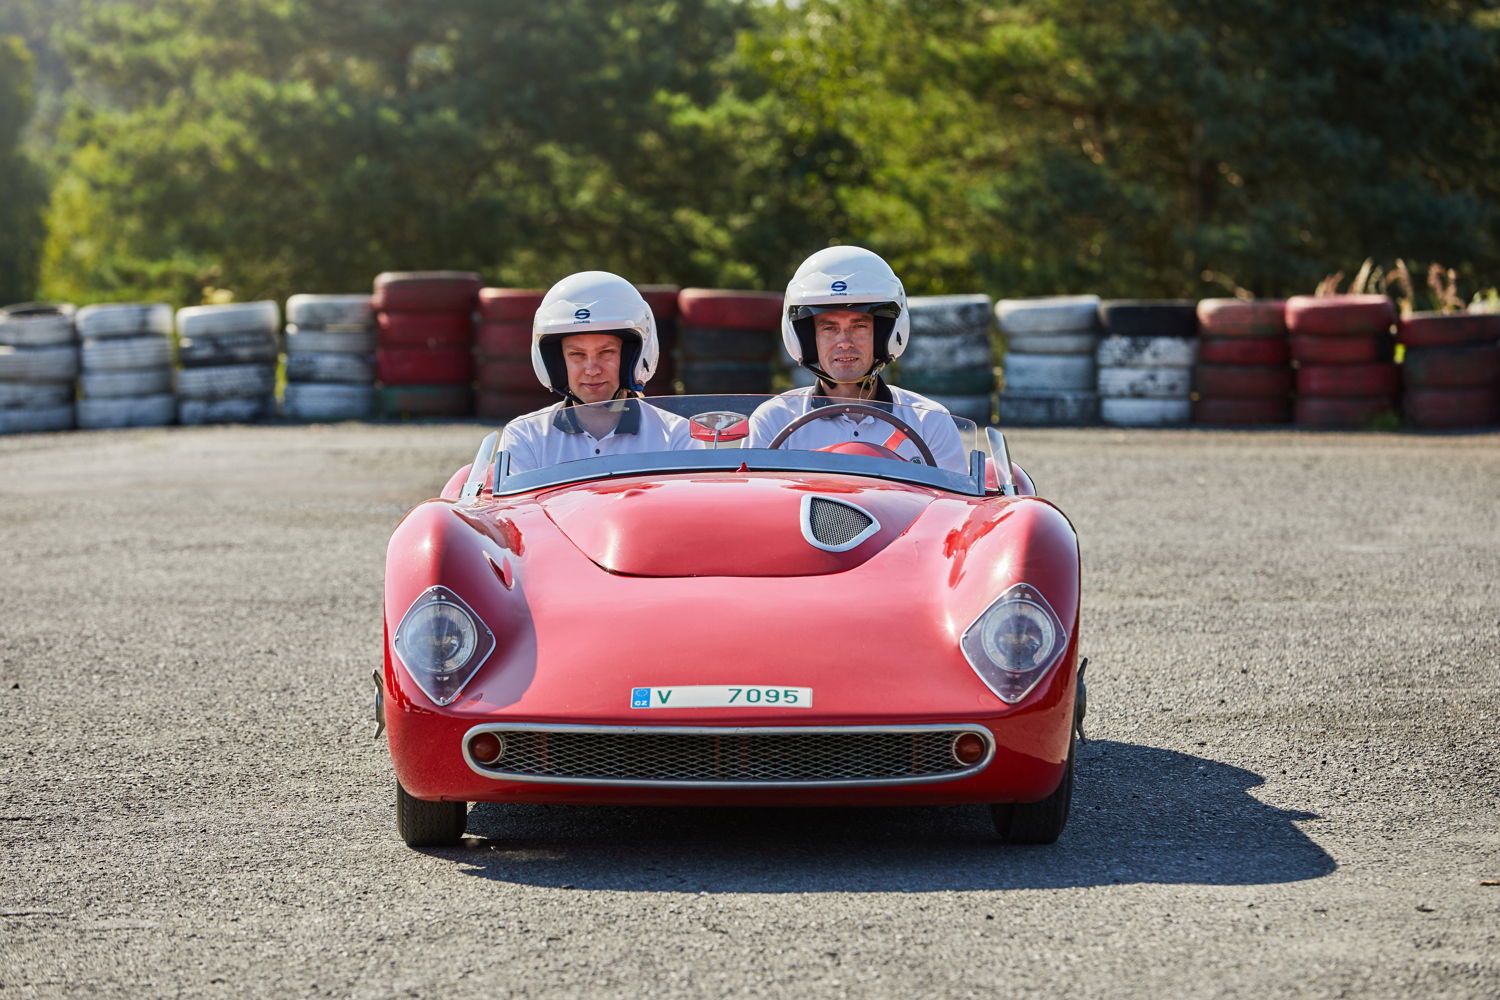 The two completed several laps with the ŠKODA 1100 OHC sports prototype from 1957, which served as inspiration for the 31 apprentices of the ŠKODA vocational school in building the dynamic Spider SLAVIA.